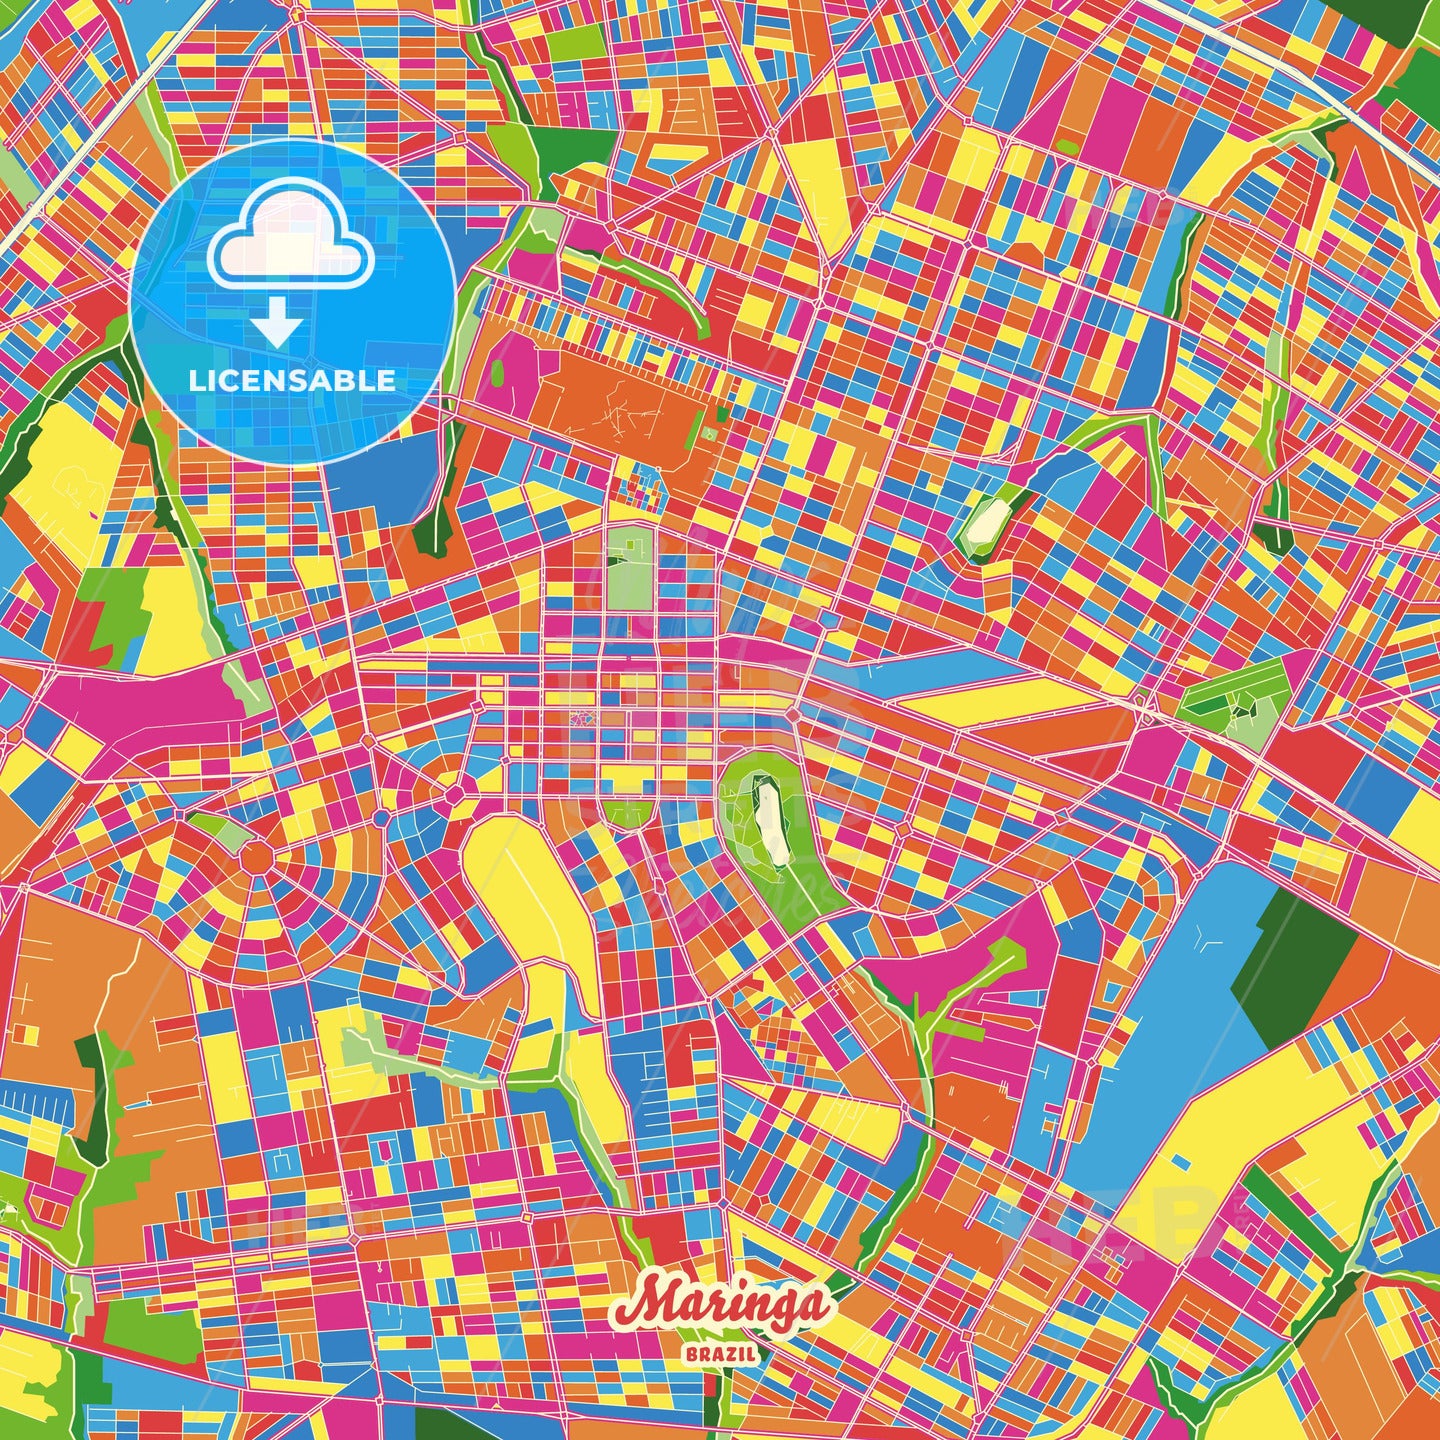 Maringa, Brazil Crazy Colorful Street Map Poster Template - HEBSTREITS Sketches